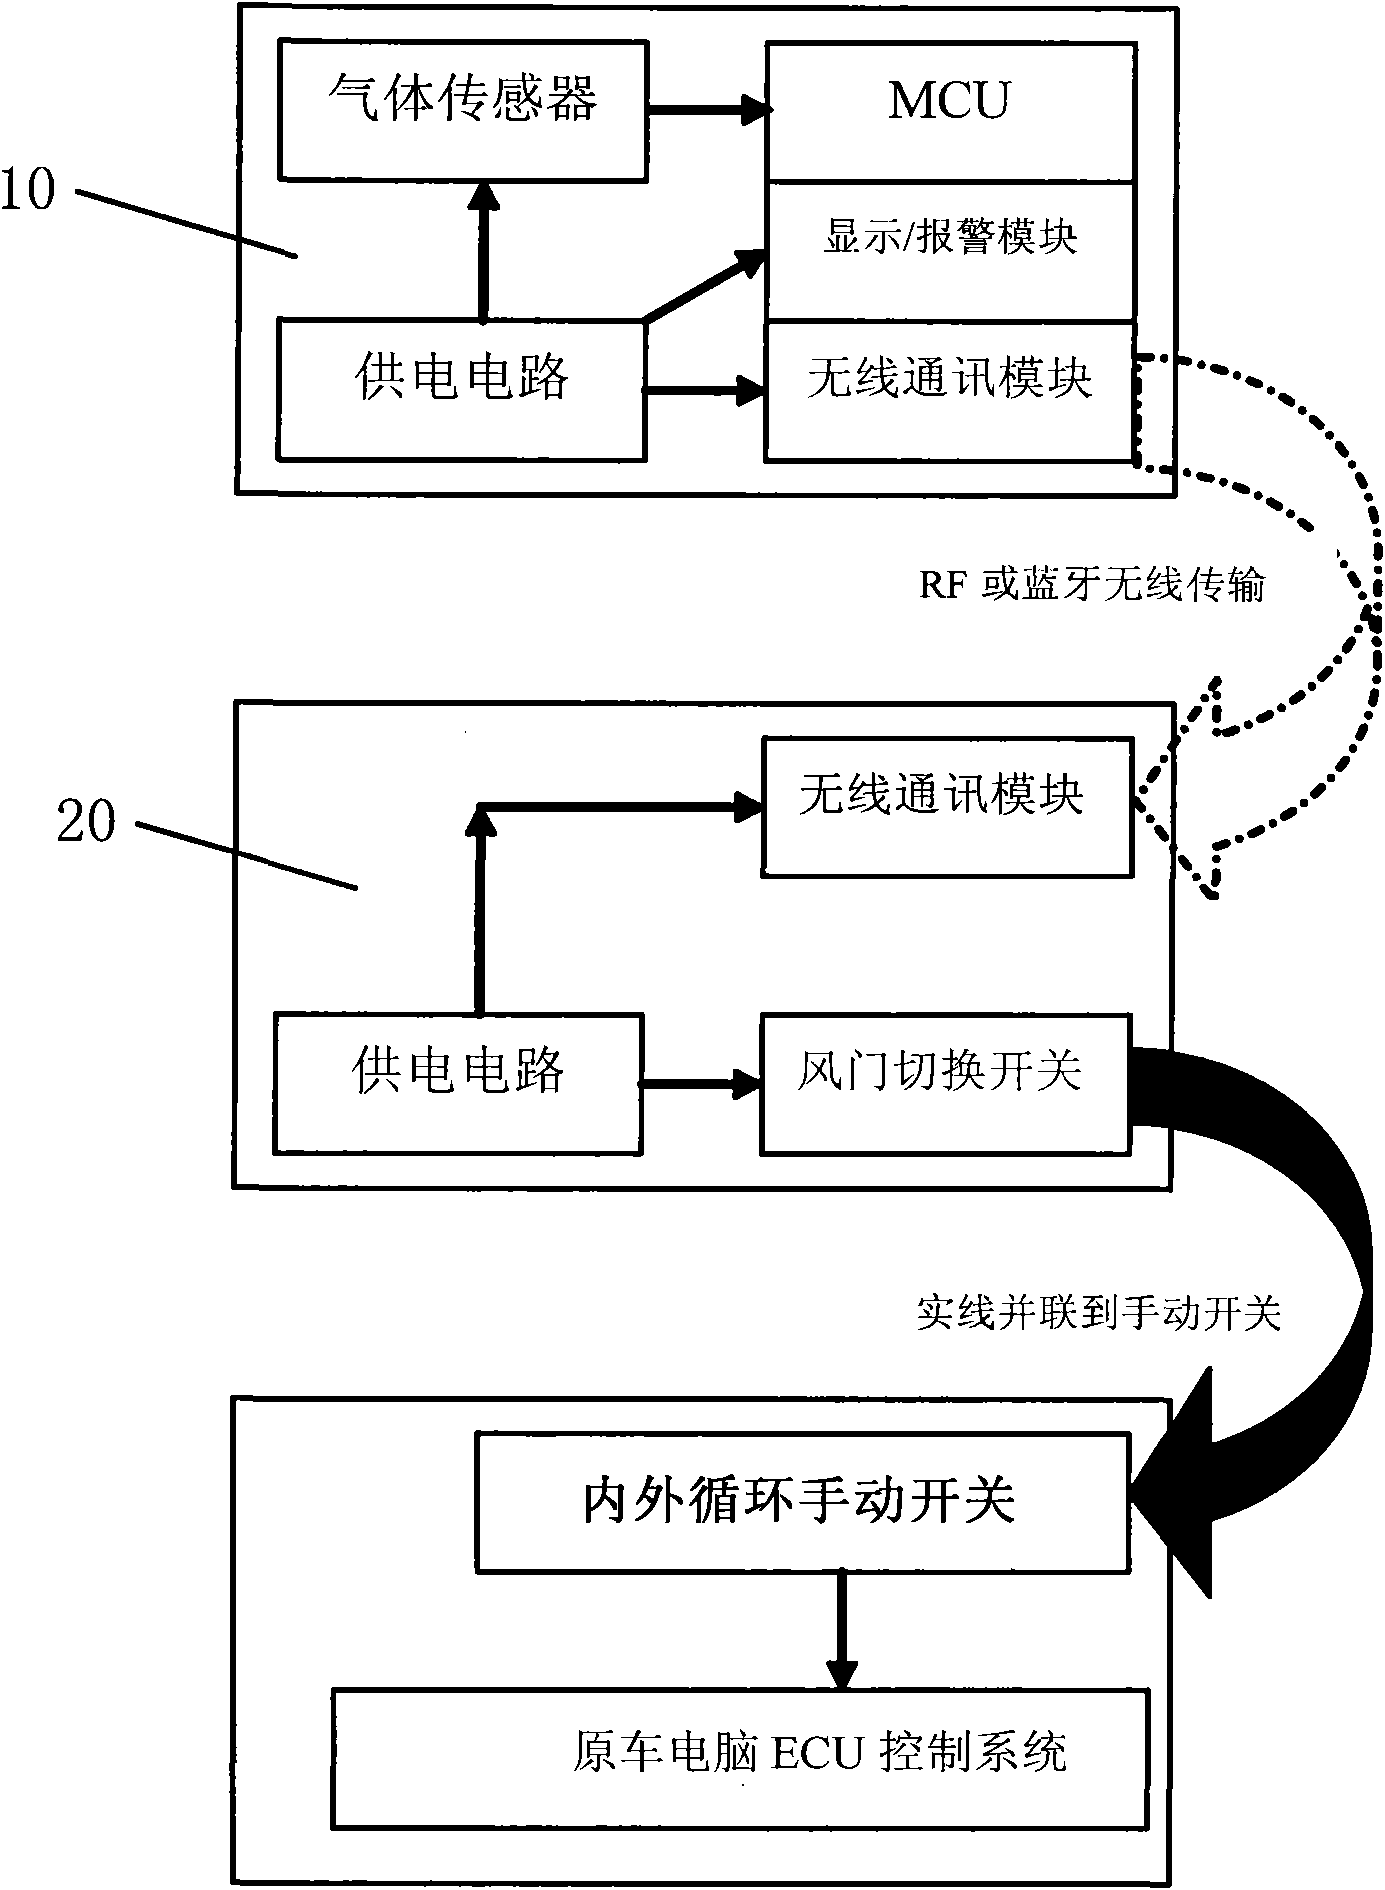 AQS (Air Quality System) implementing method and system applied to automobile afterloading modification